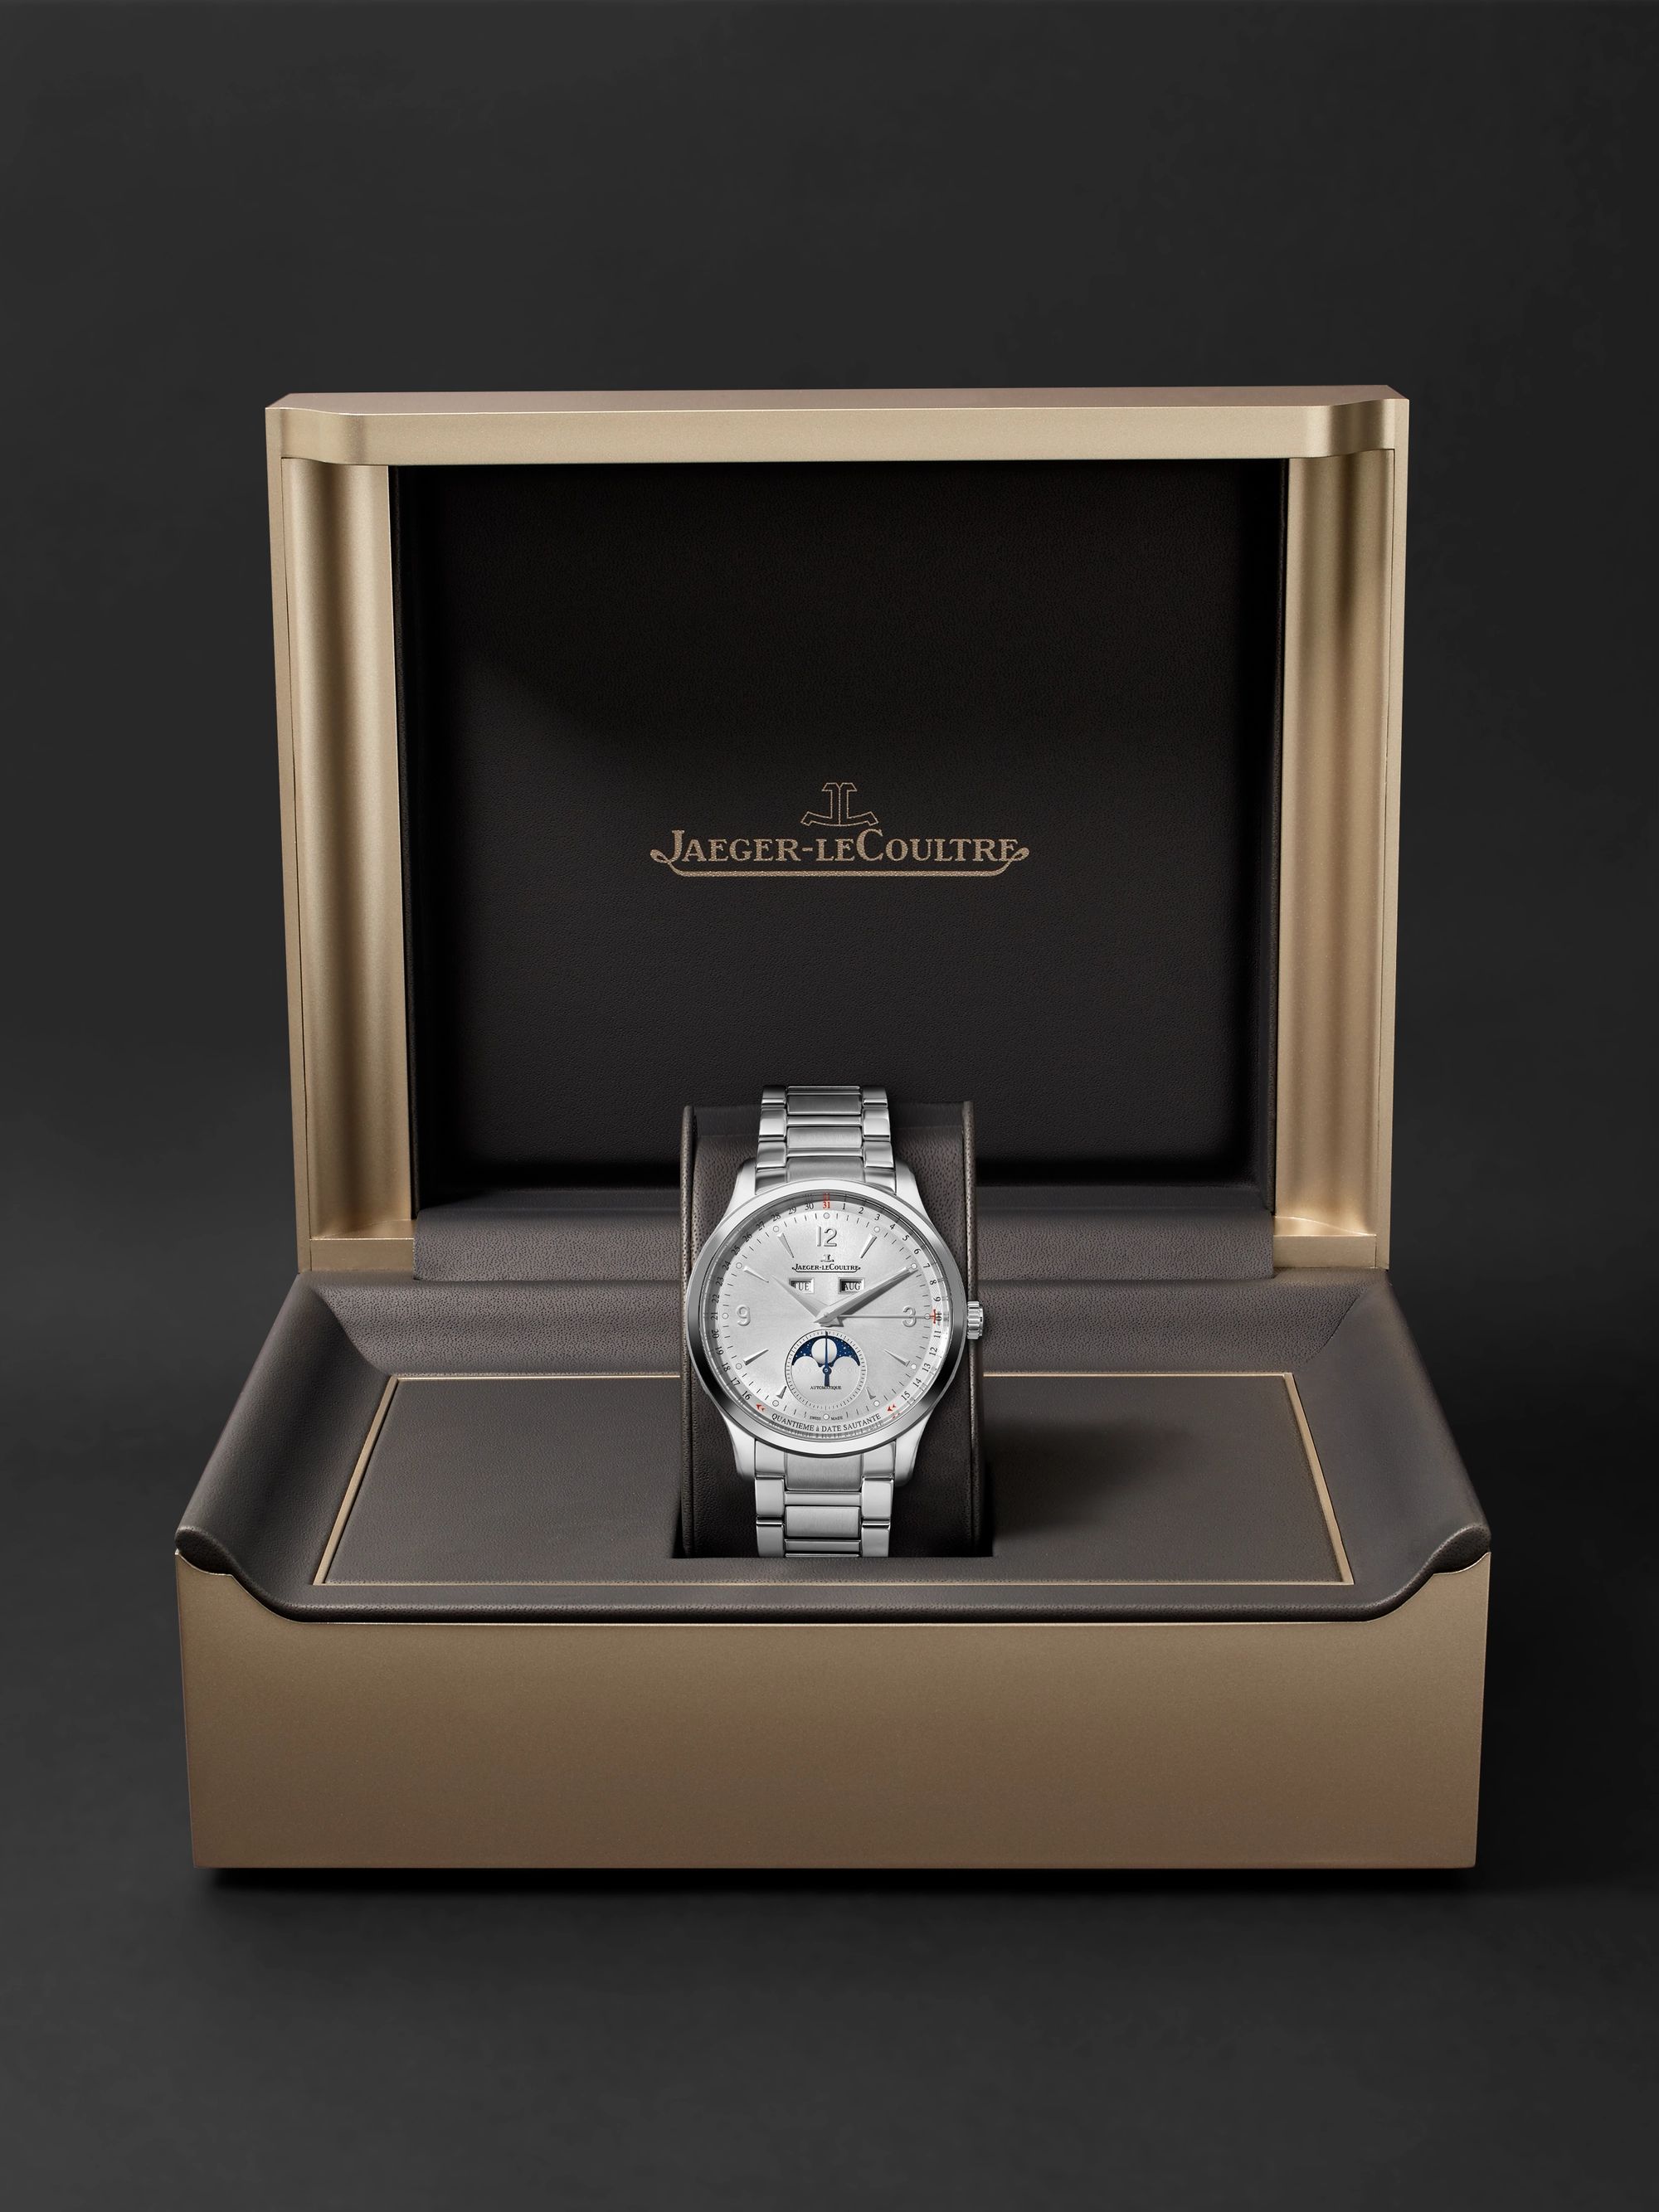 JAEGER-LECOULTRE Master Control Automatic Moon-Phase 40mm Stainless Steel Watch, Ref. No. Q4148120